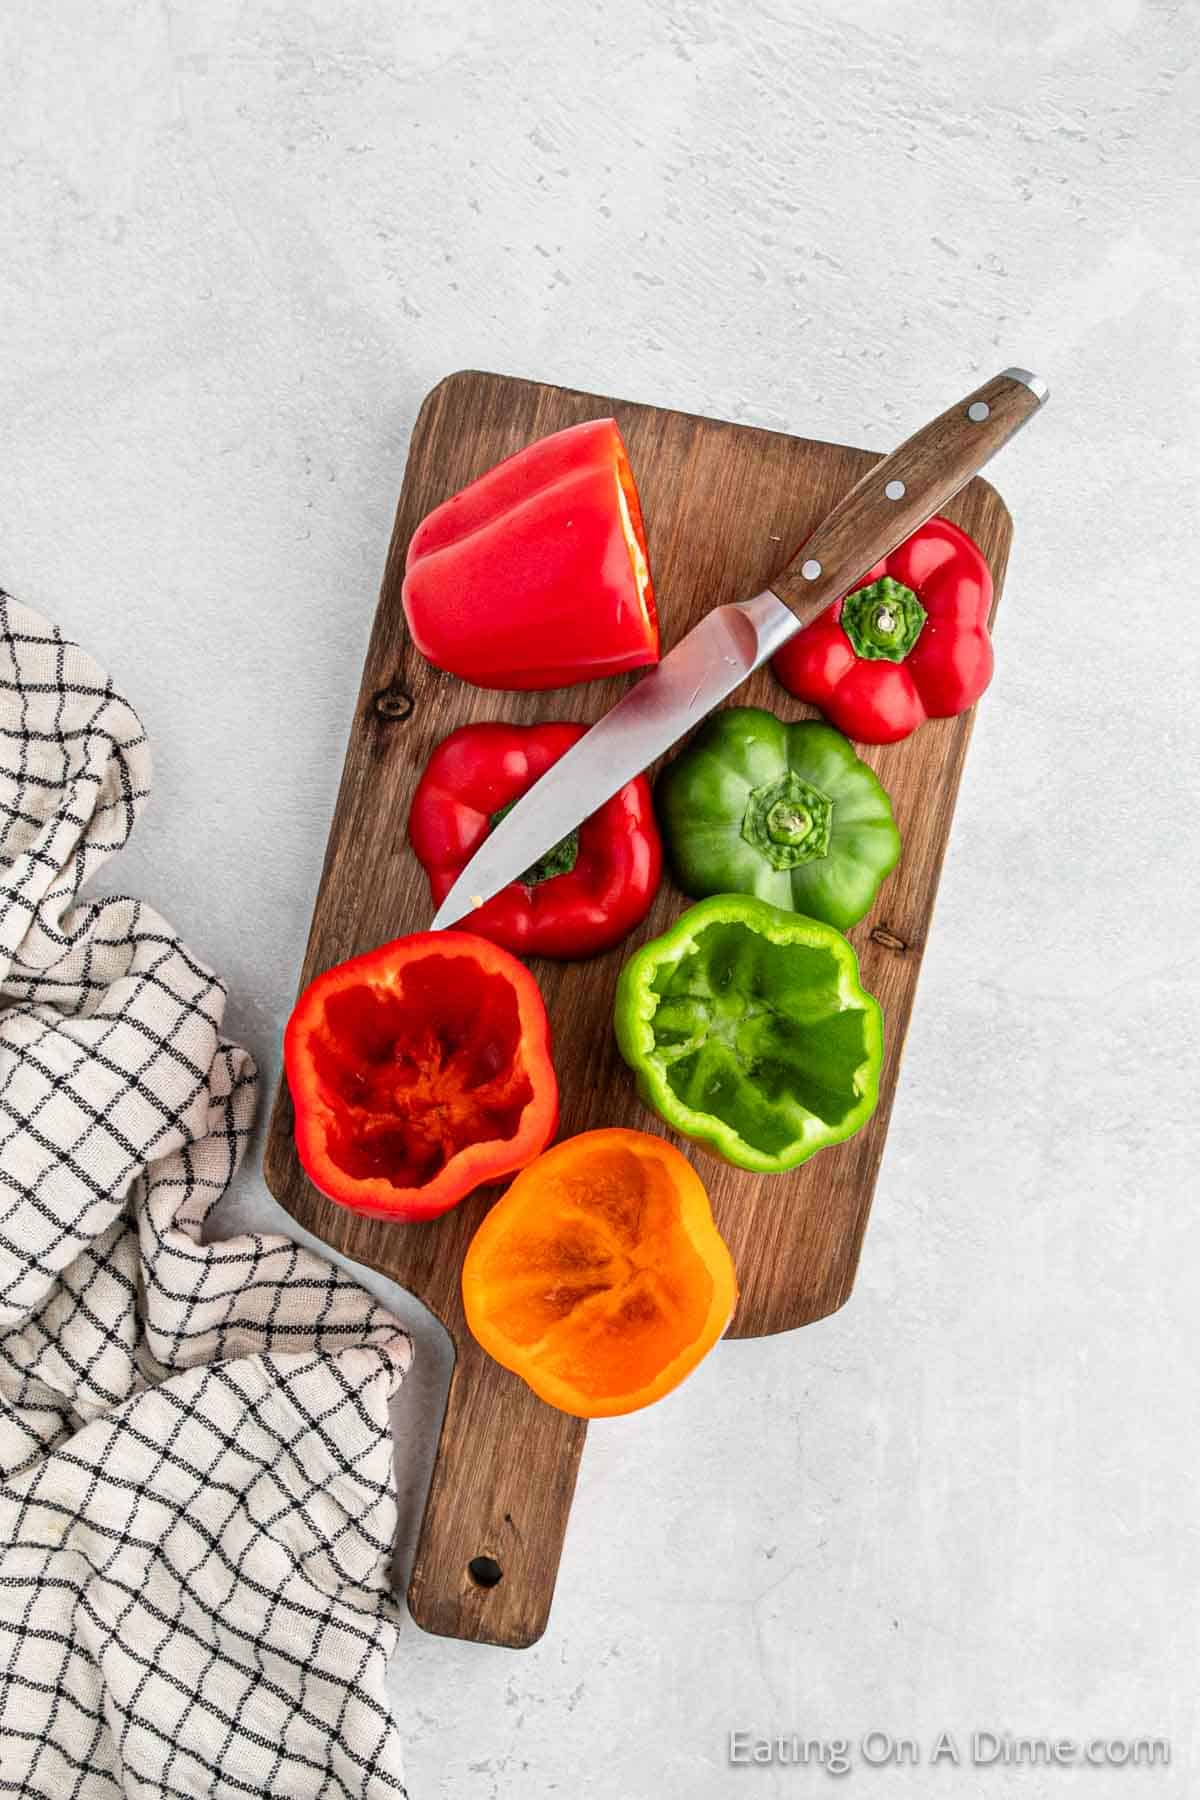 Slice the tops off the bell peppers on a cutting board with a knife